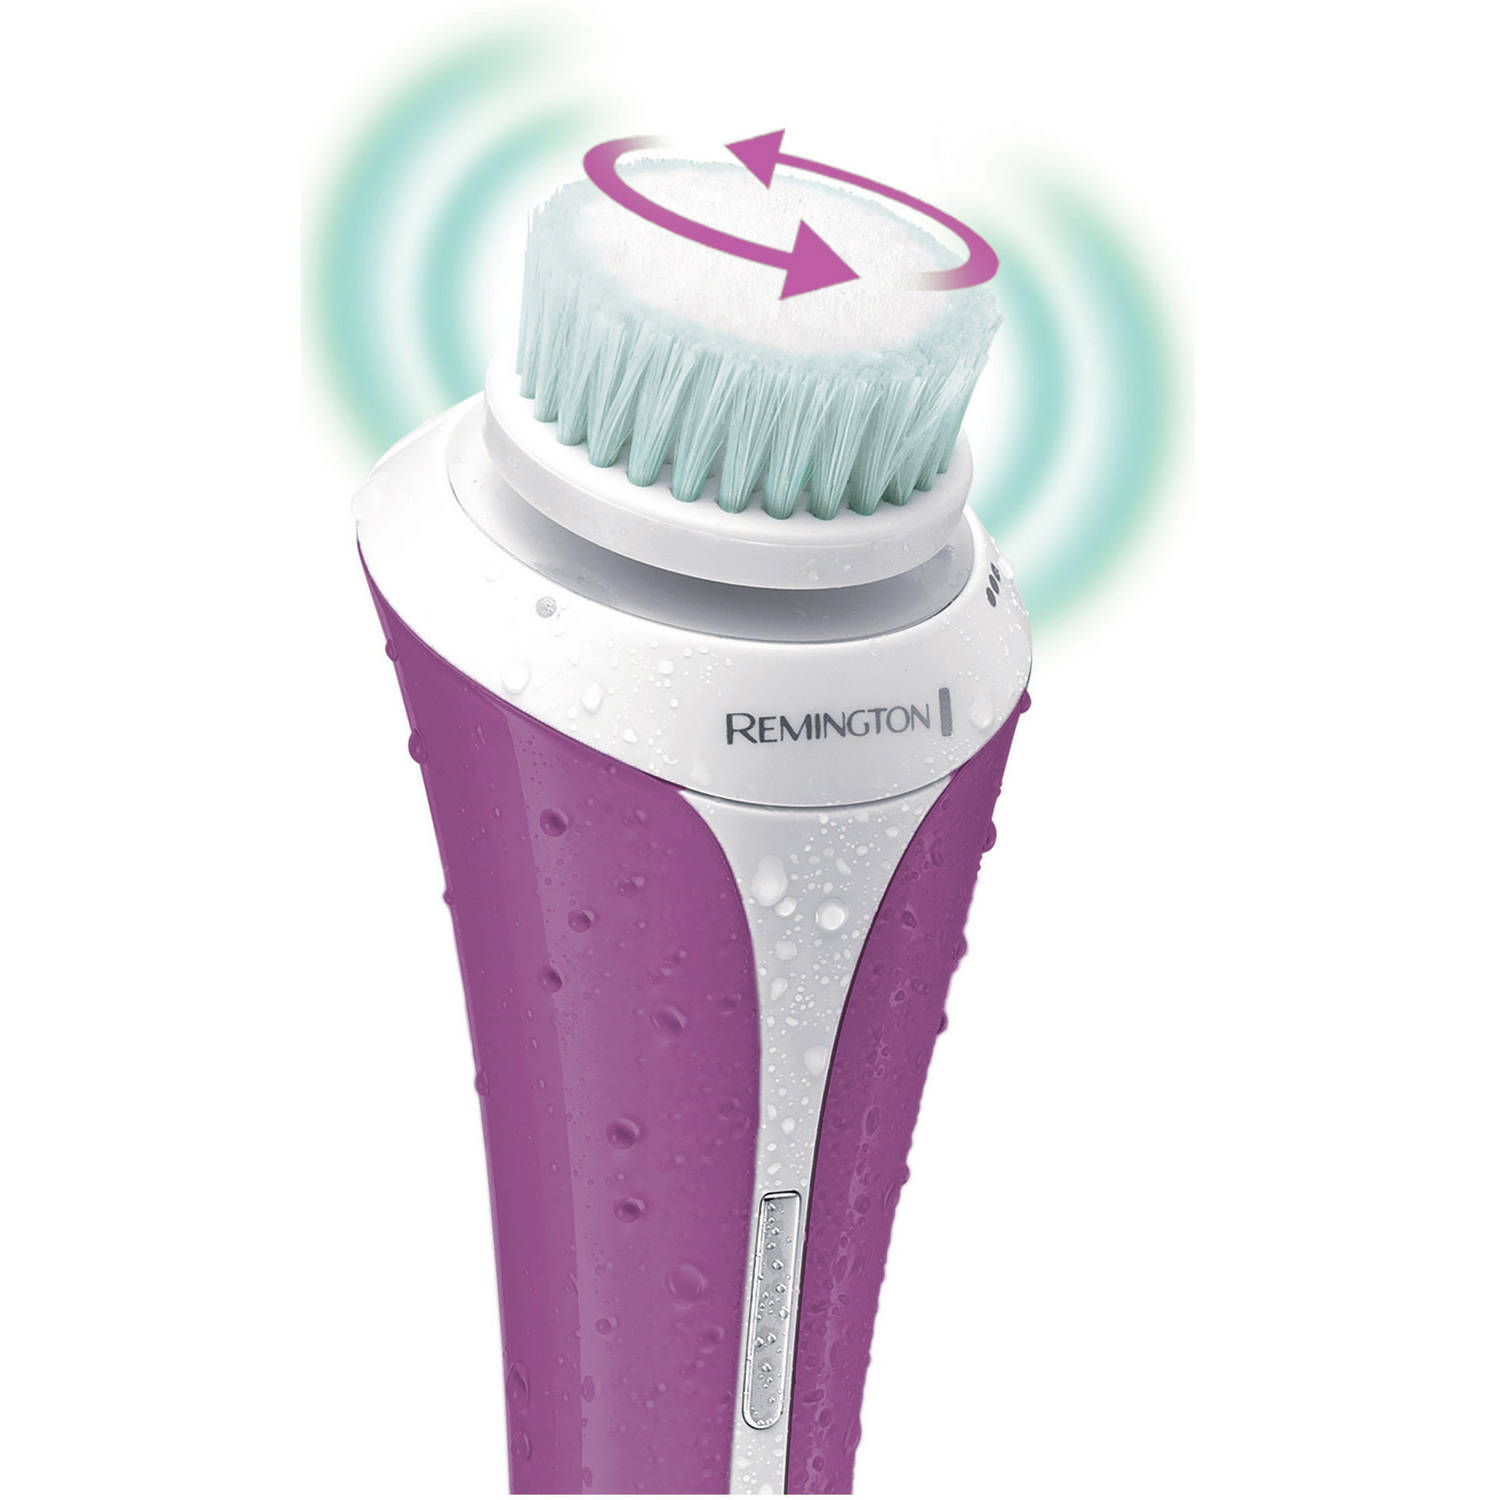 Remington Dual Action Advanced Facial Cleansing Brush, Rechargeable and Showerproof, Facial Cleanser, FC1000NA - image 3 of 9